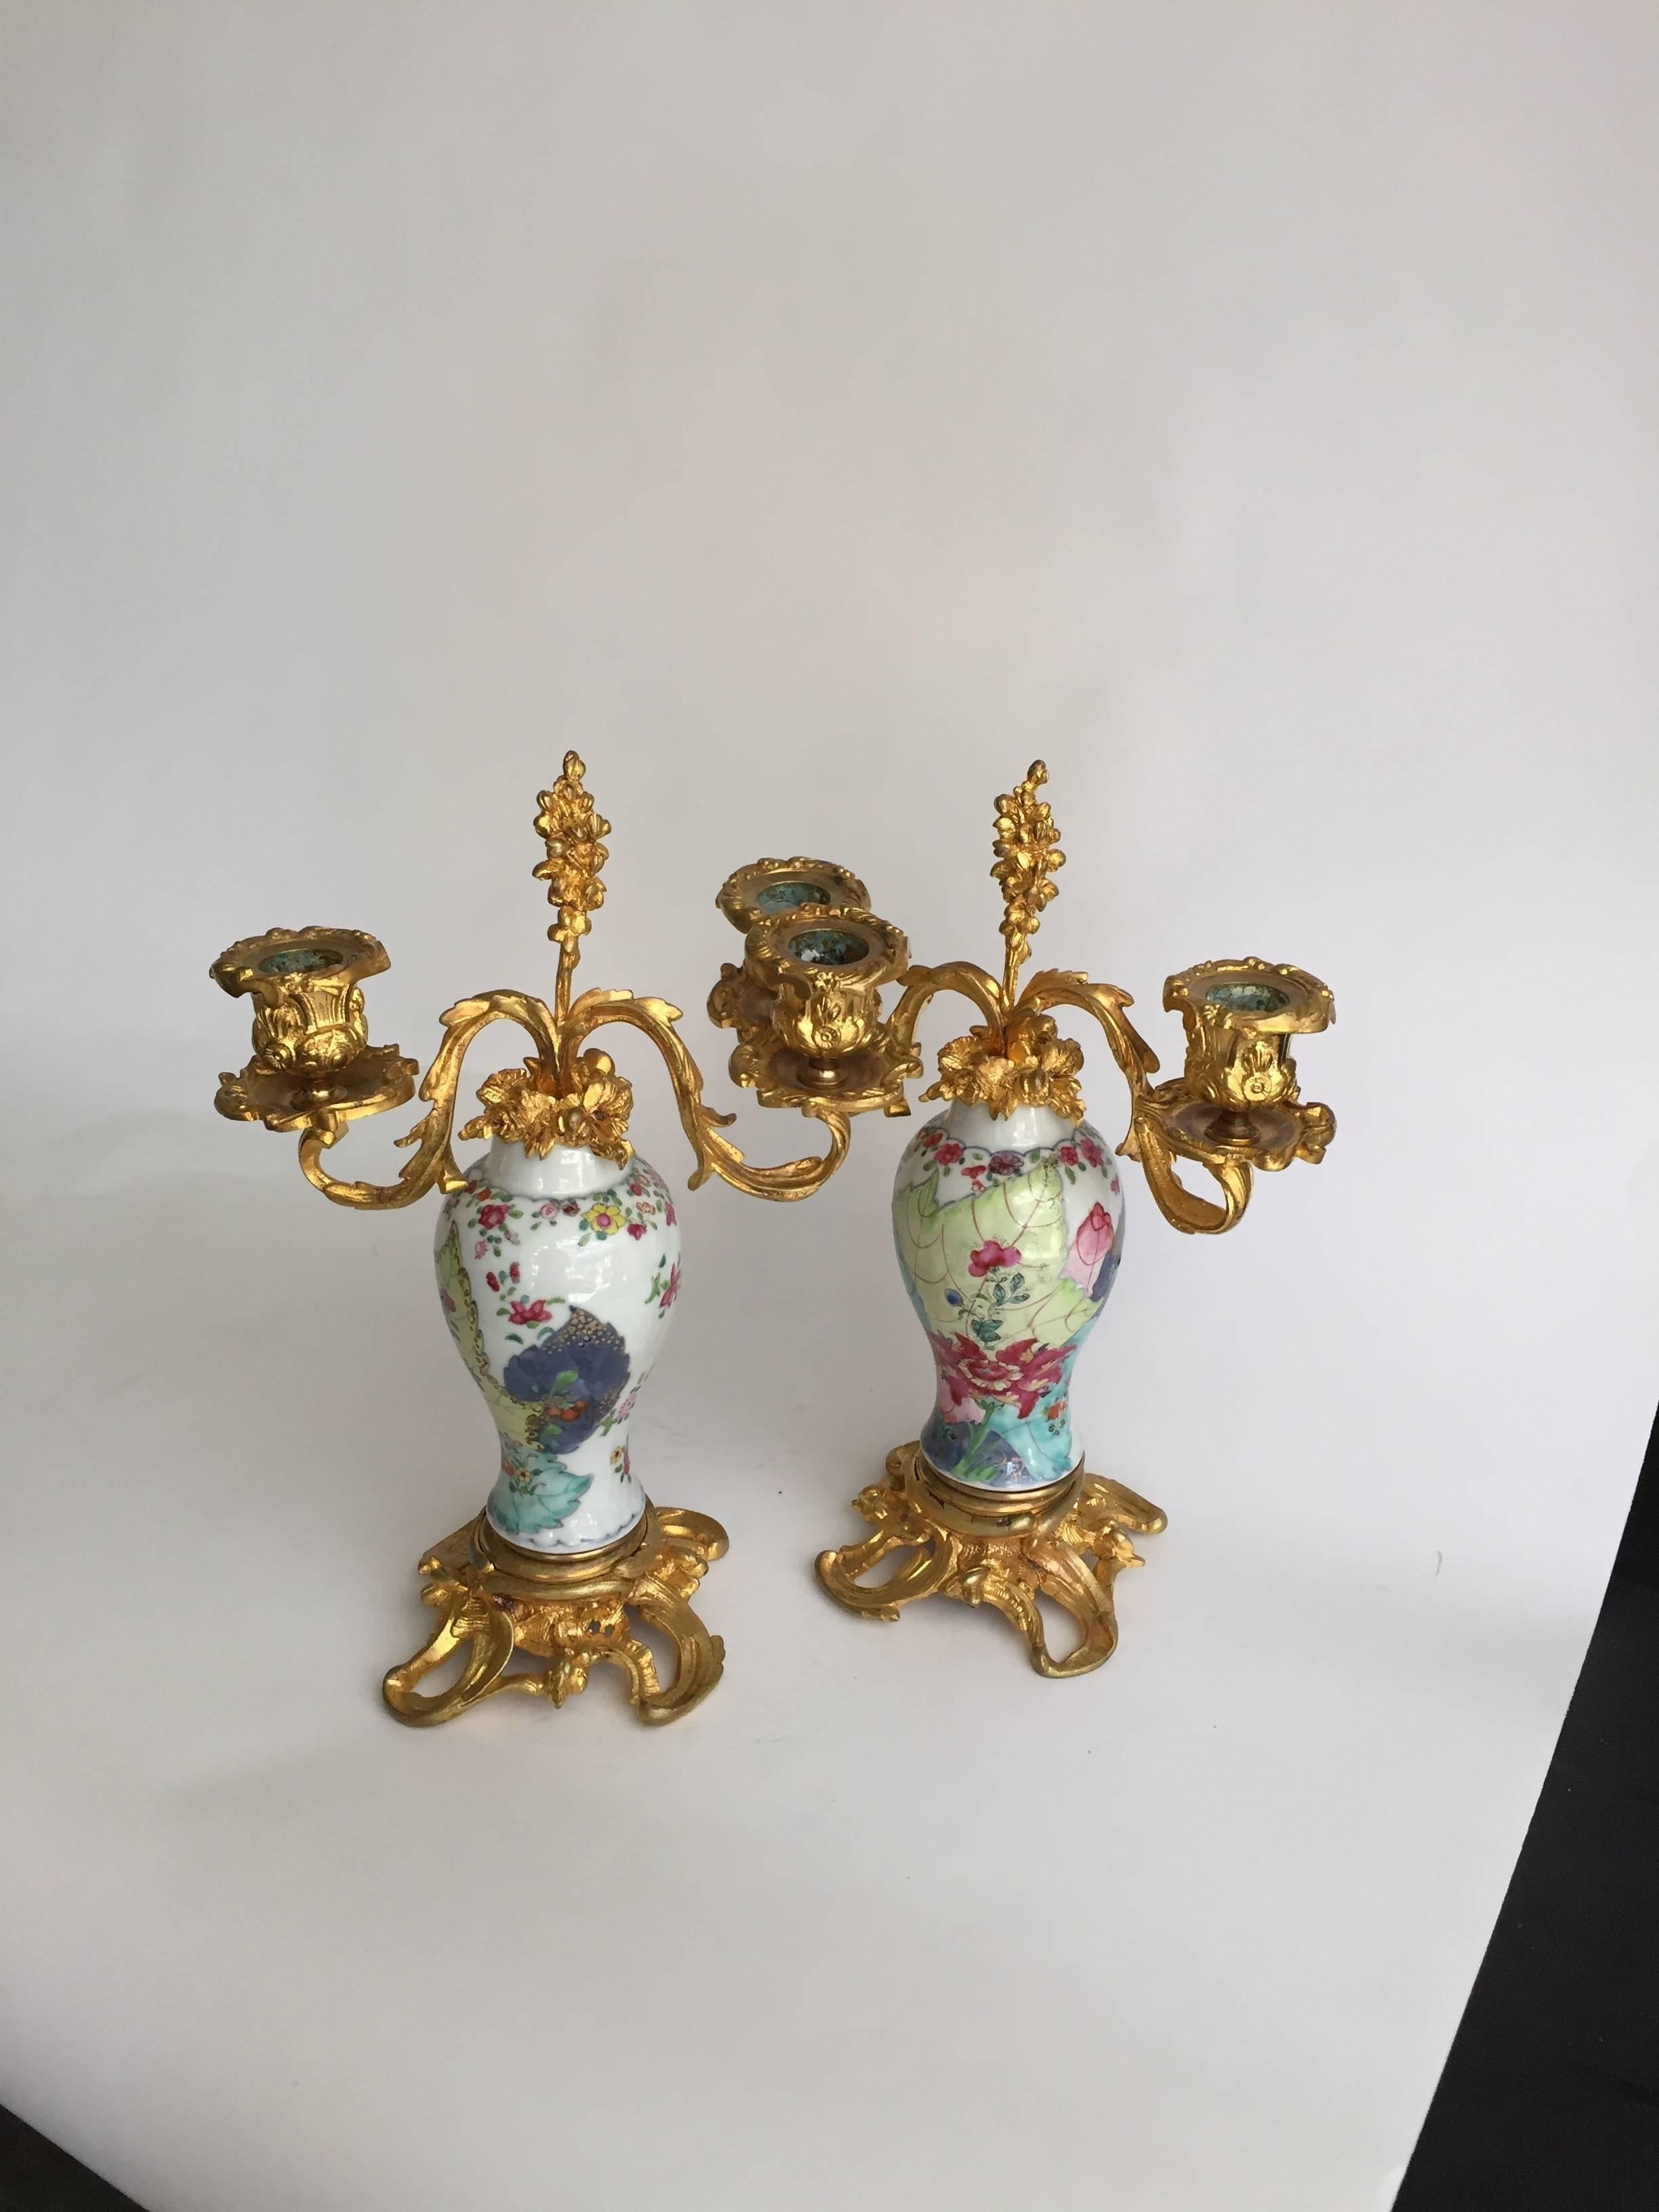 Chinese export porcelain pair of vases painted in the “Tobacco Leaf” pattern, mounted as two-light candelabra in Fine Rococo ormolu (gilt bronze metal) mounts. The vases from a mantel garniture, Qing dynasty, 18th century. Unmarked. 11” H.